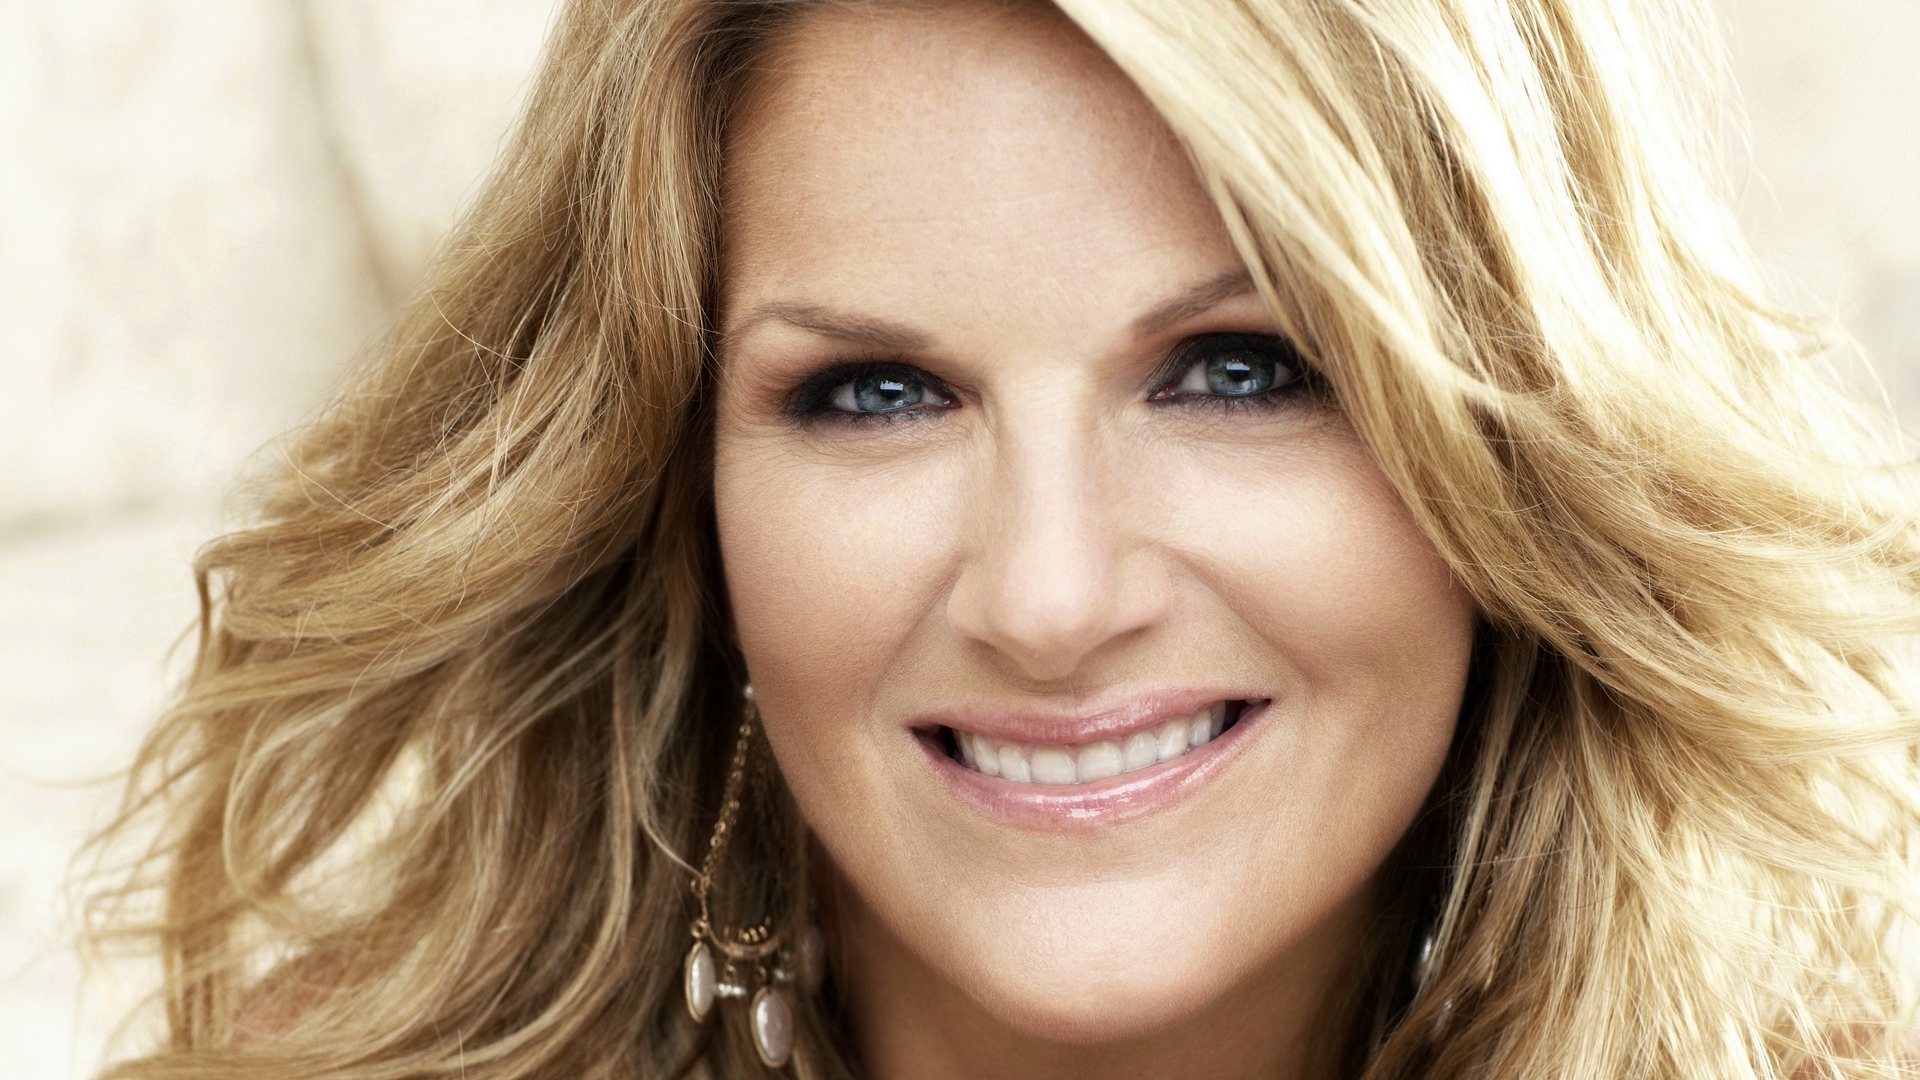 Shes In Love With The Boy av Trisha Yearwood